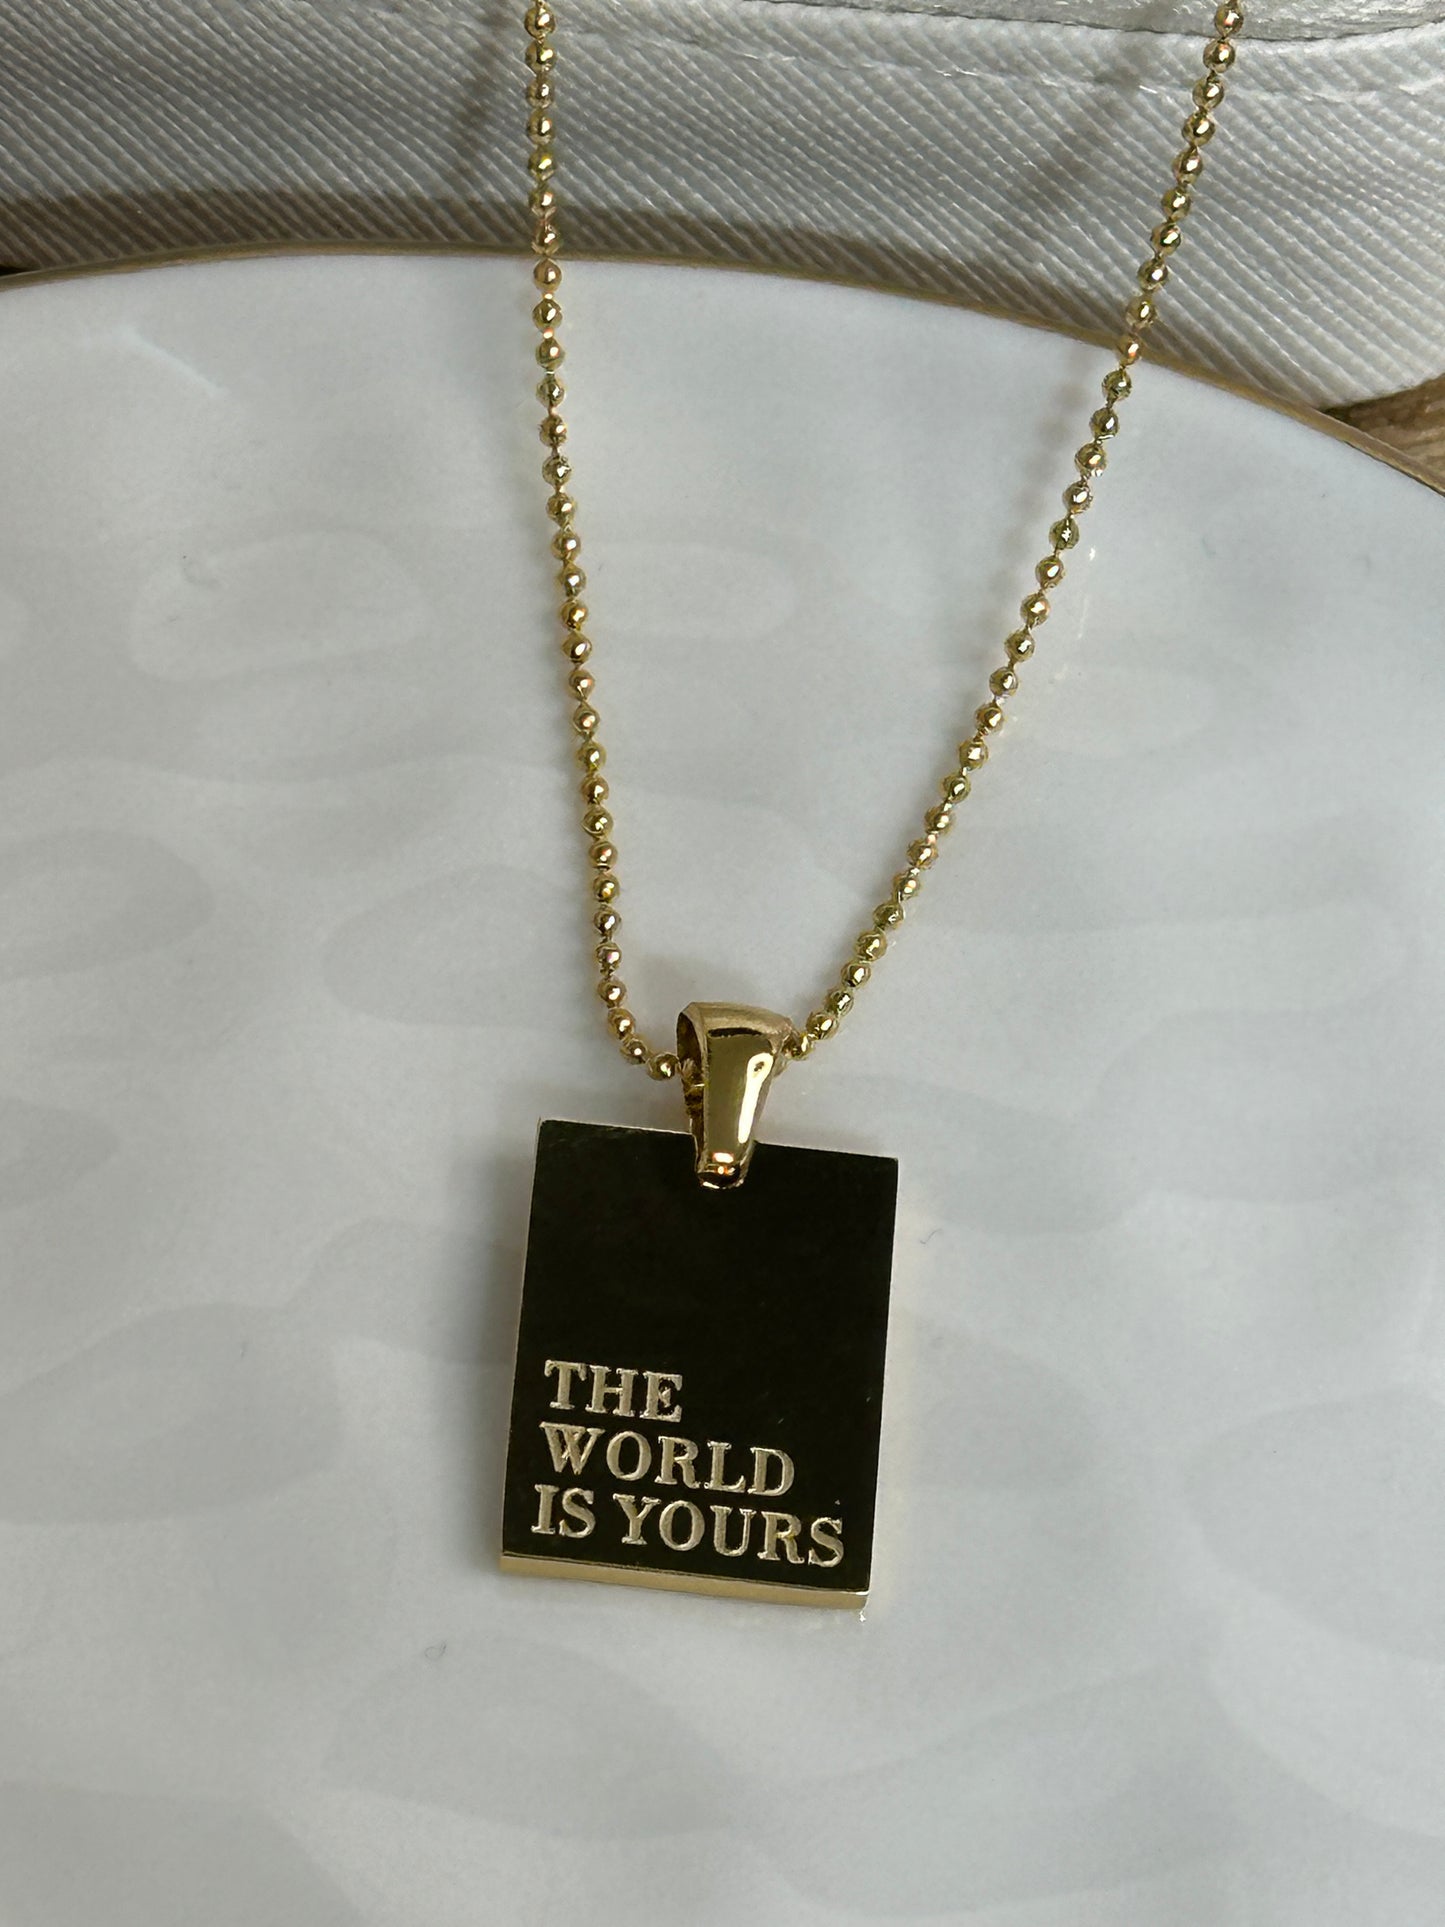 The Affirmation Necklace